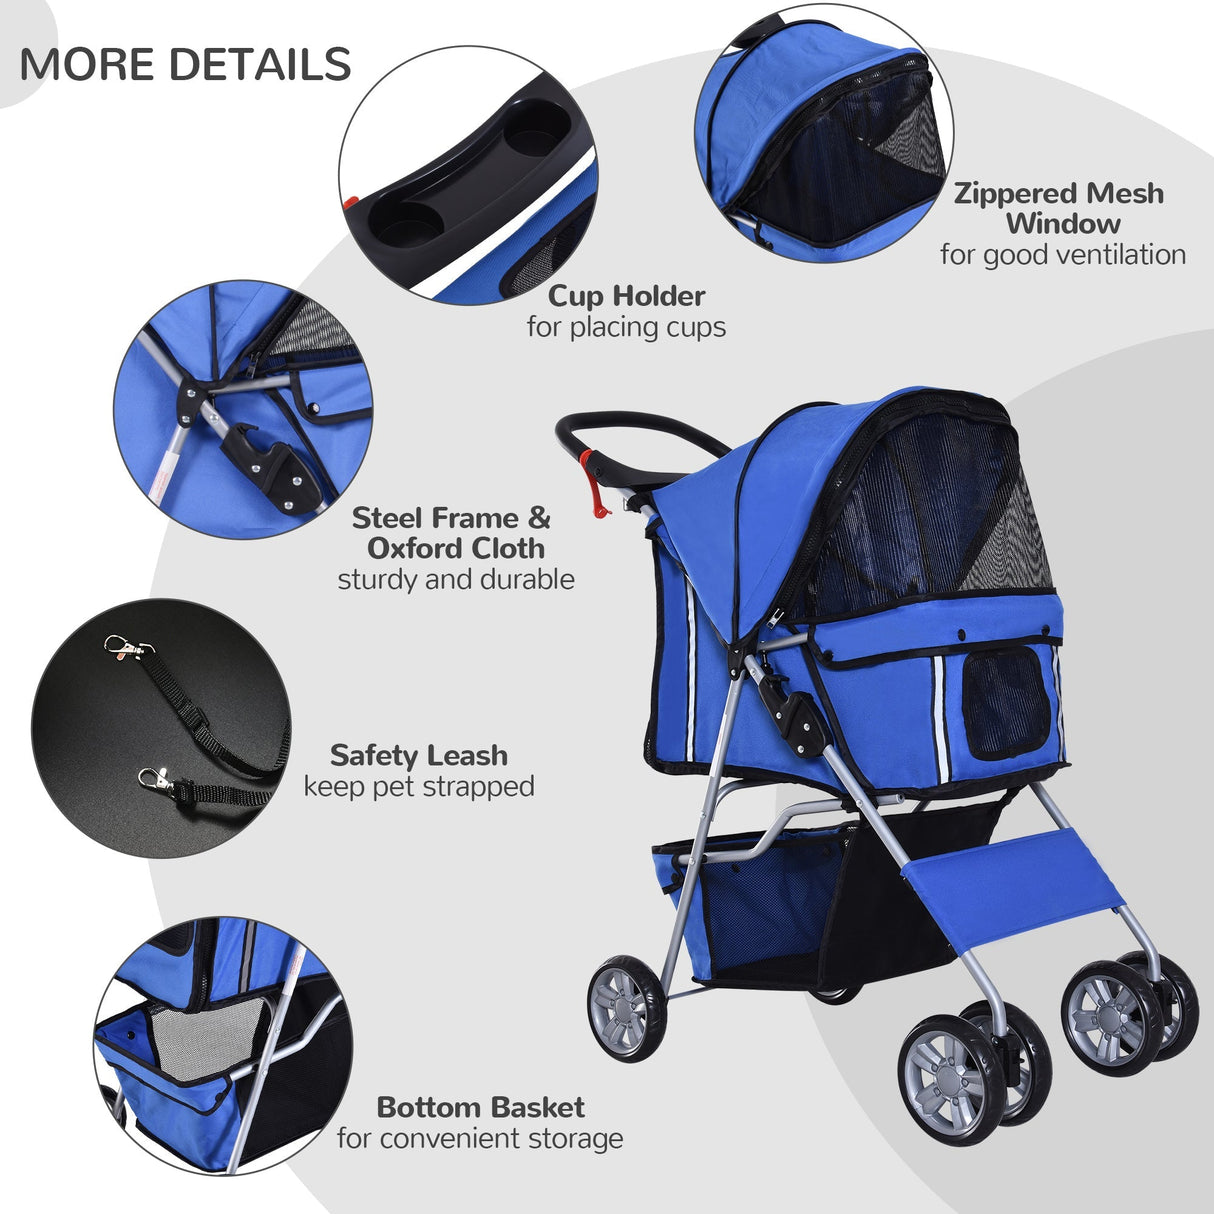 Dog Pushchair for Small Miniature Dogs Cats Foldable Travel Carriage with Wheels Zipper Entry Cup Holder Storage Basket, PawHut, Blue